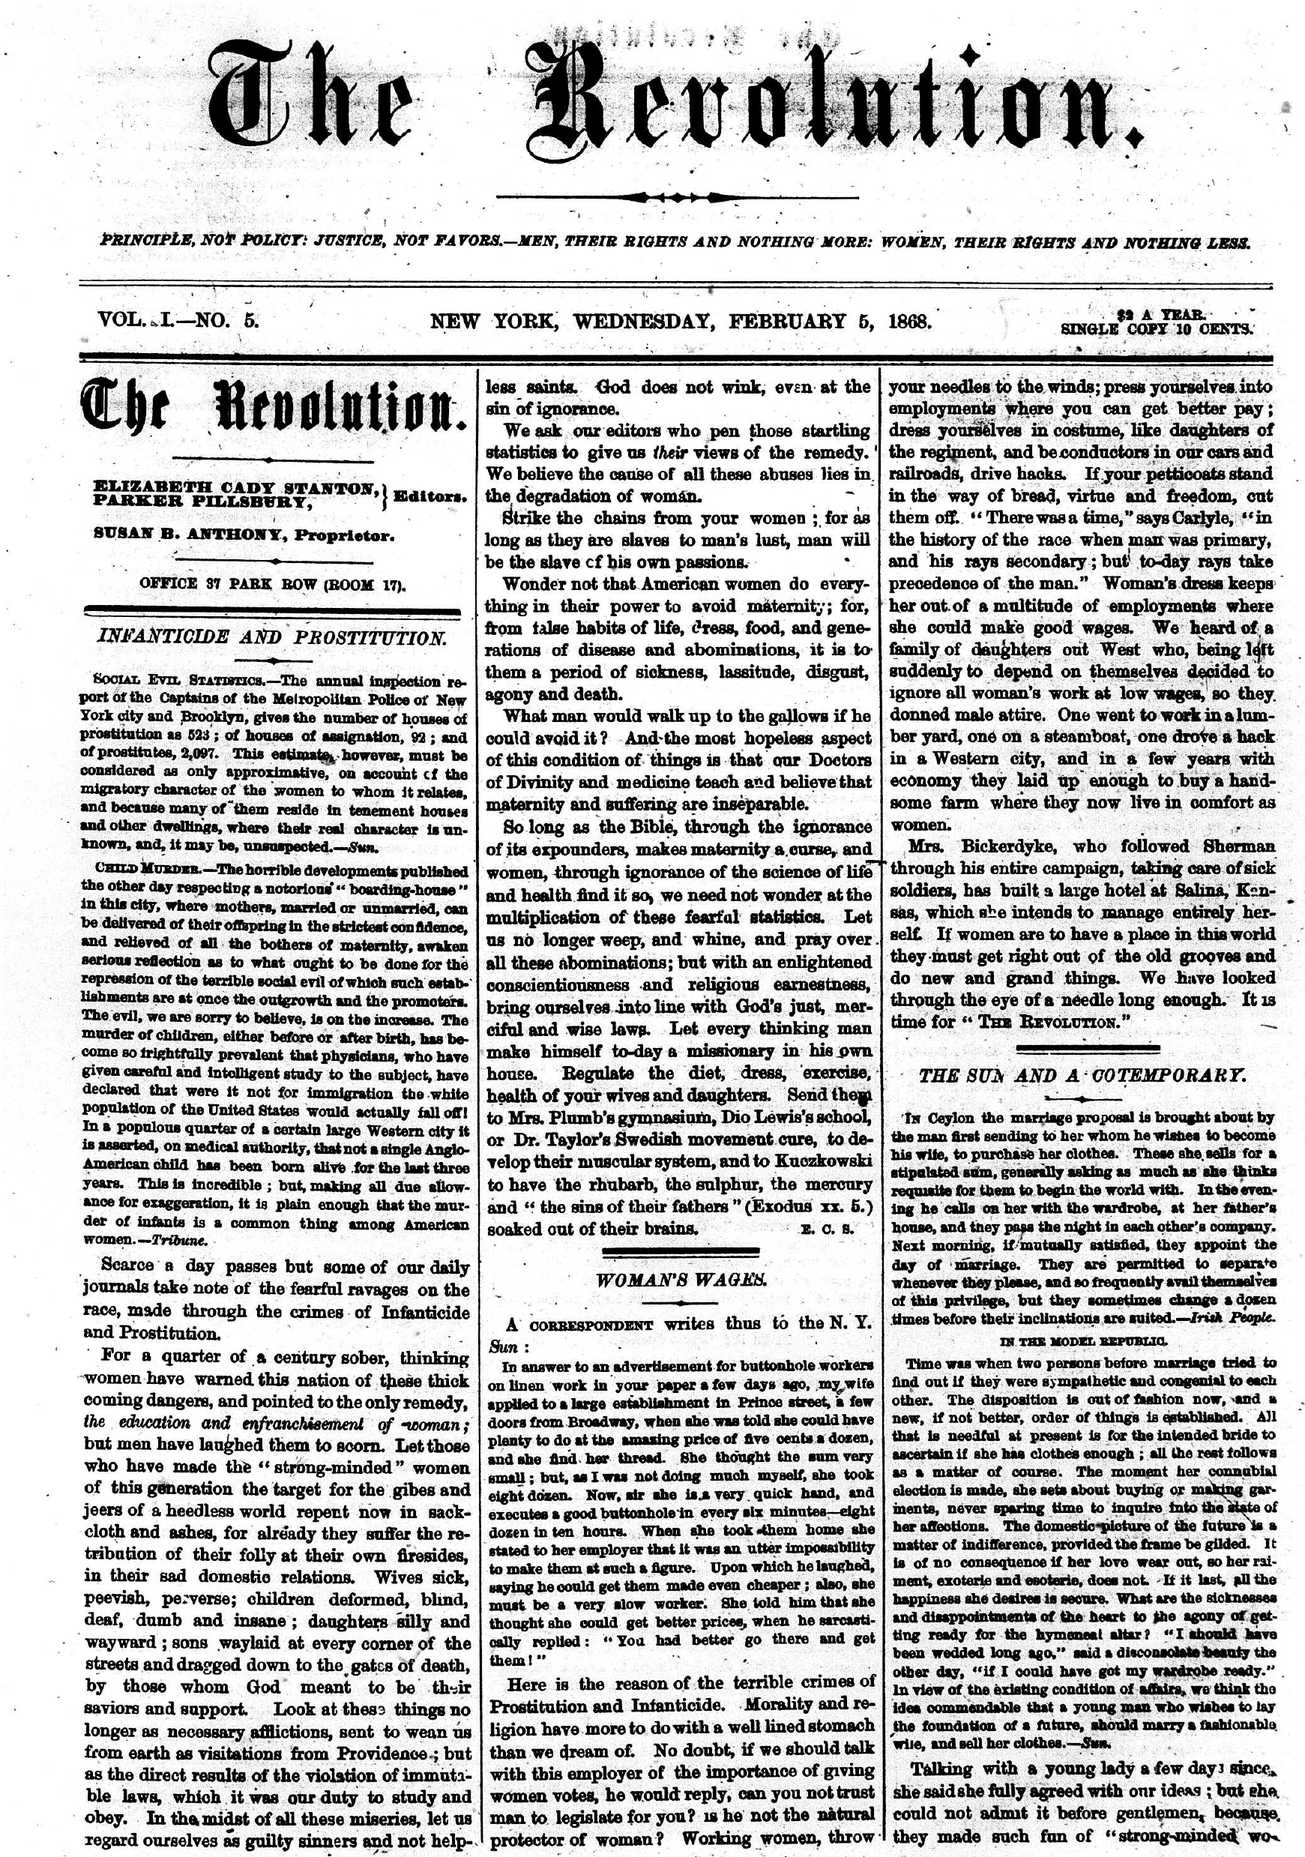 The-Revolution-Susan-B.-Anthony's-Suffrage-Women's-Rights-Newspaper-February-5,-1868